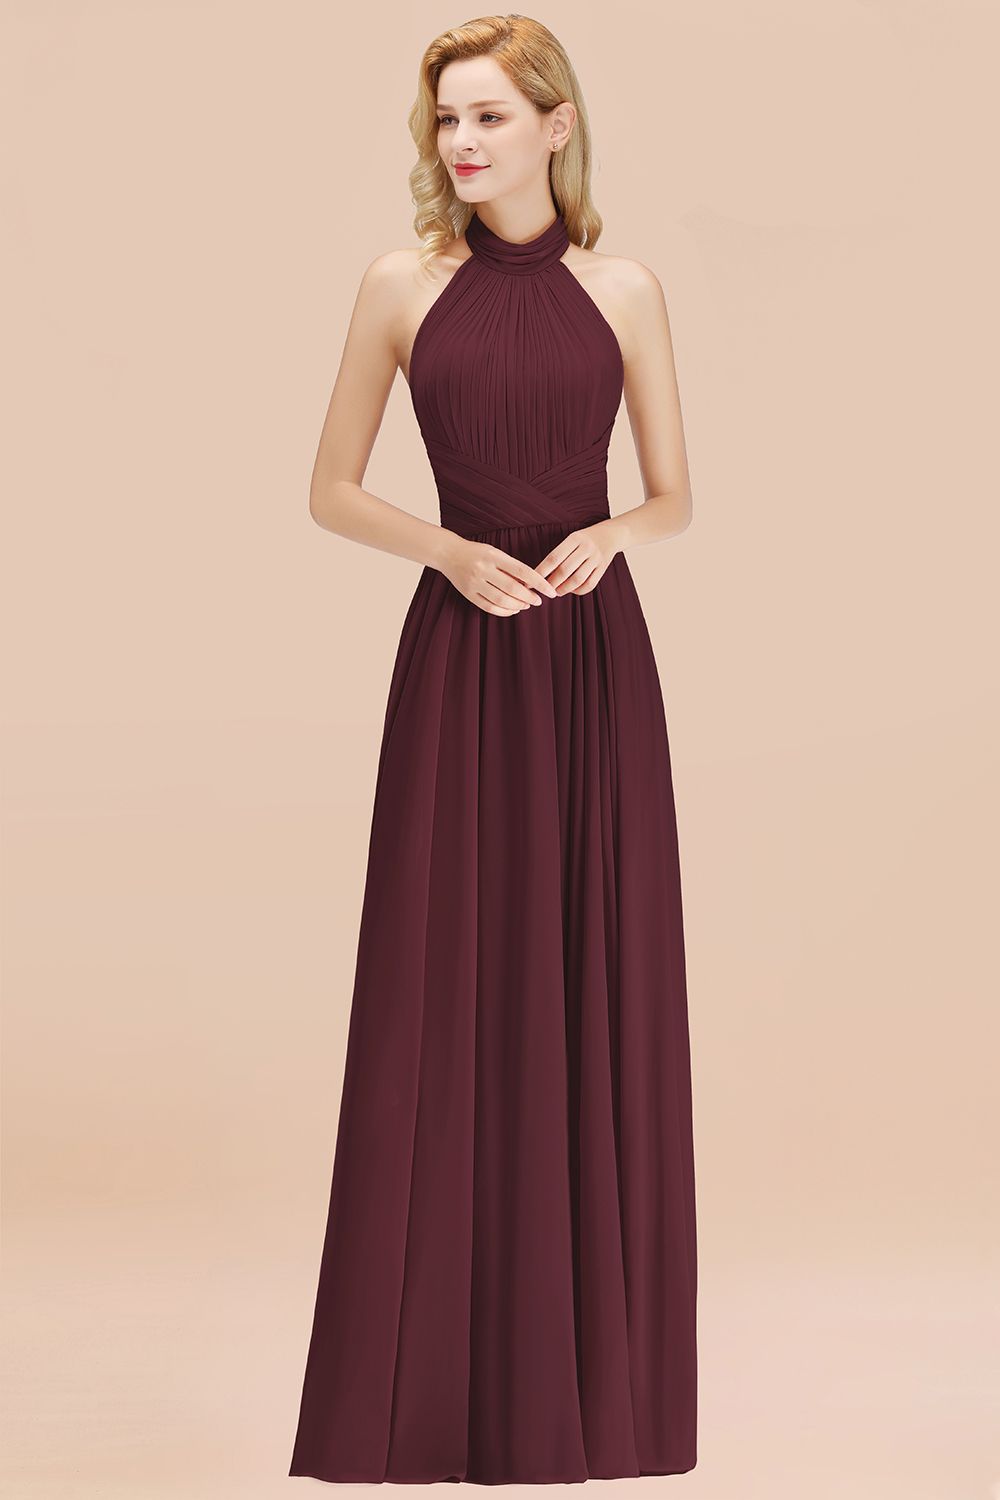 Load image into Gallery viewer, Gorgeous High-Neck Halter Backless Bridesmaid Dress Dusty Rose Chiffon Maid of Honor Dress-27dress
